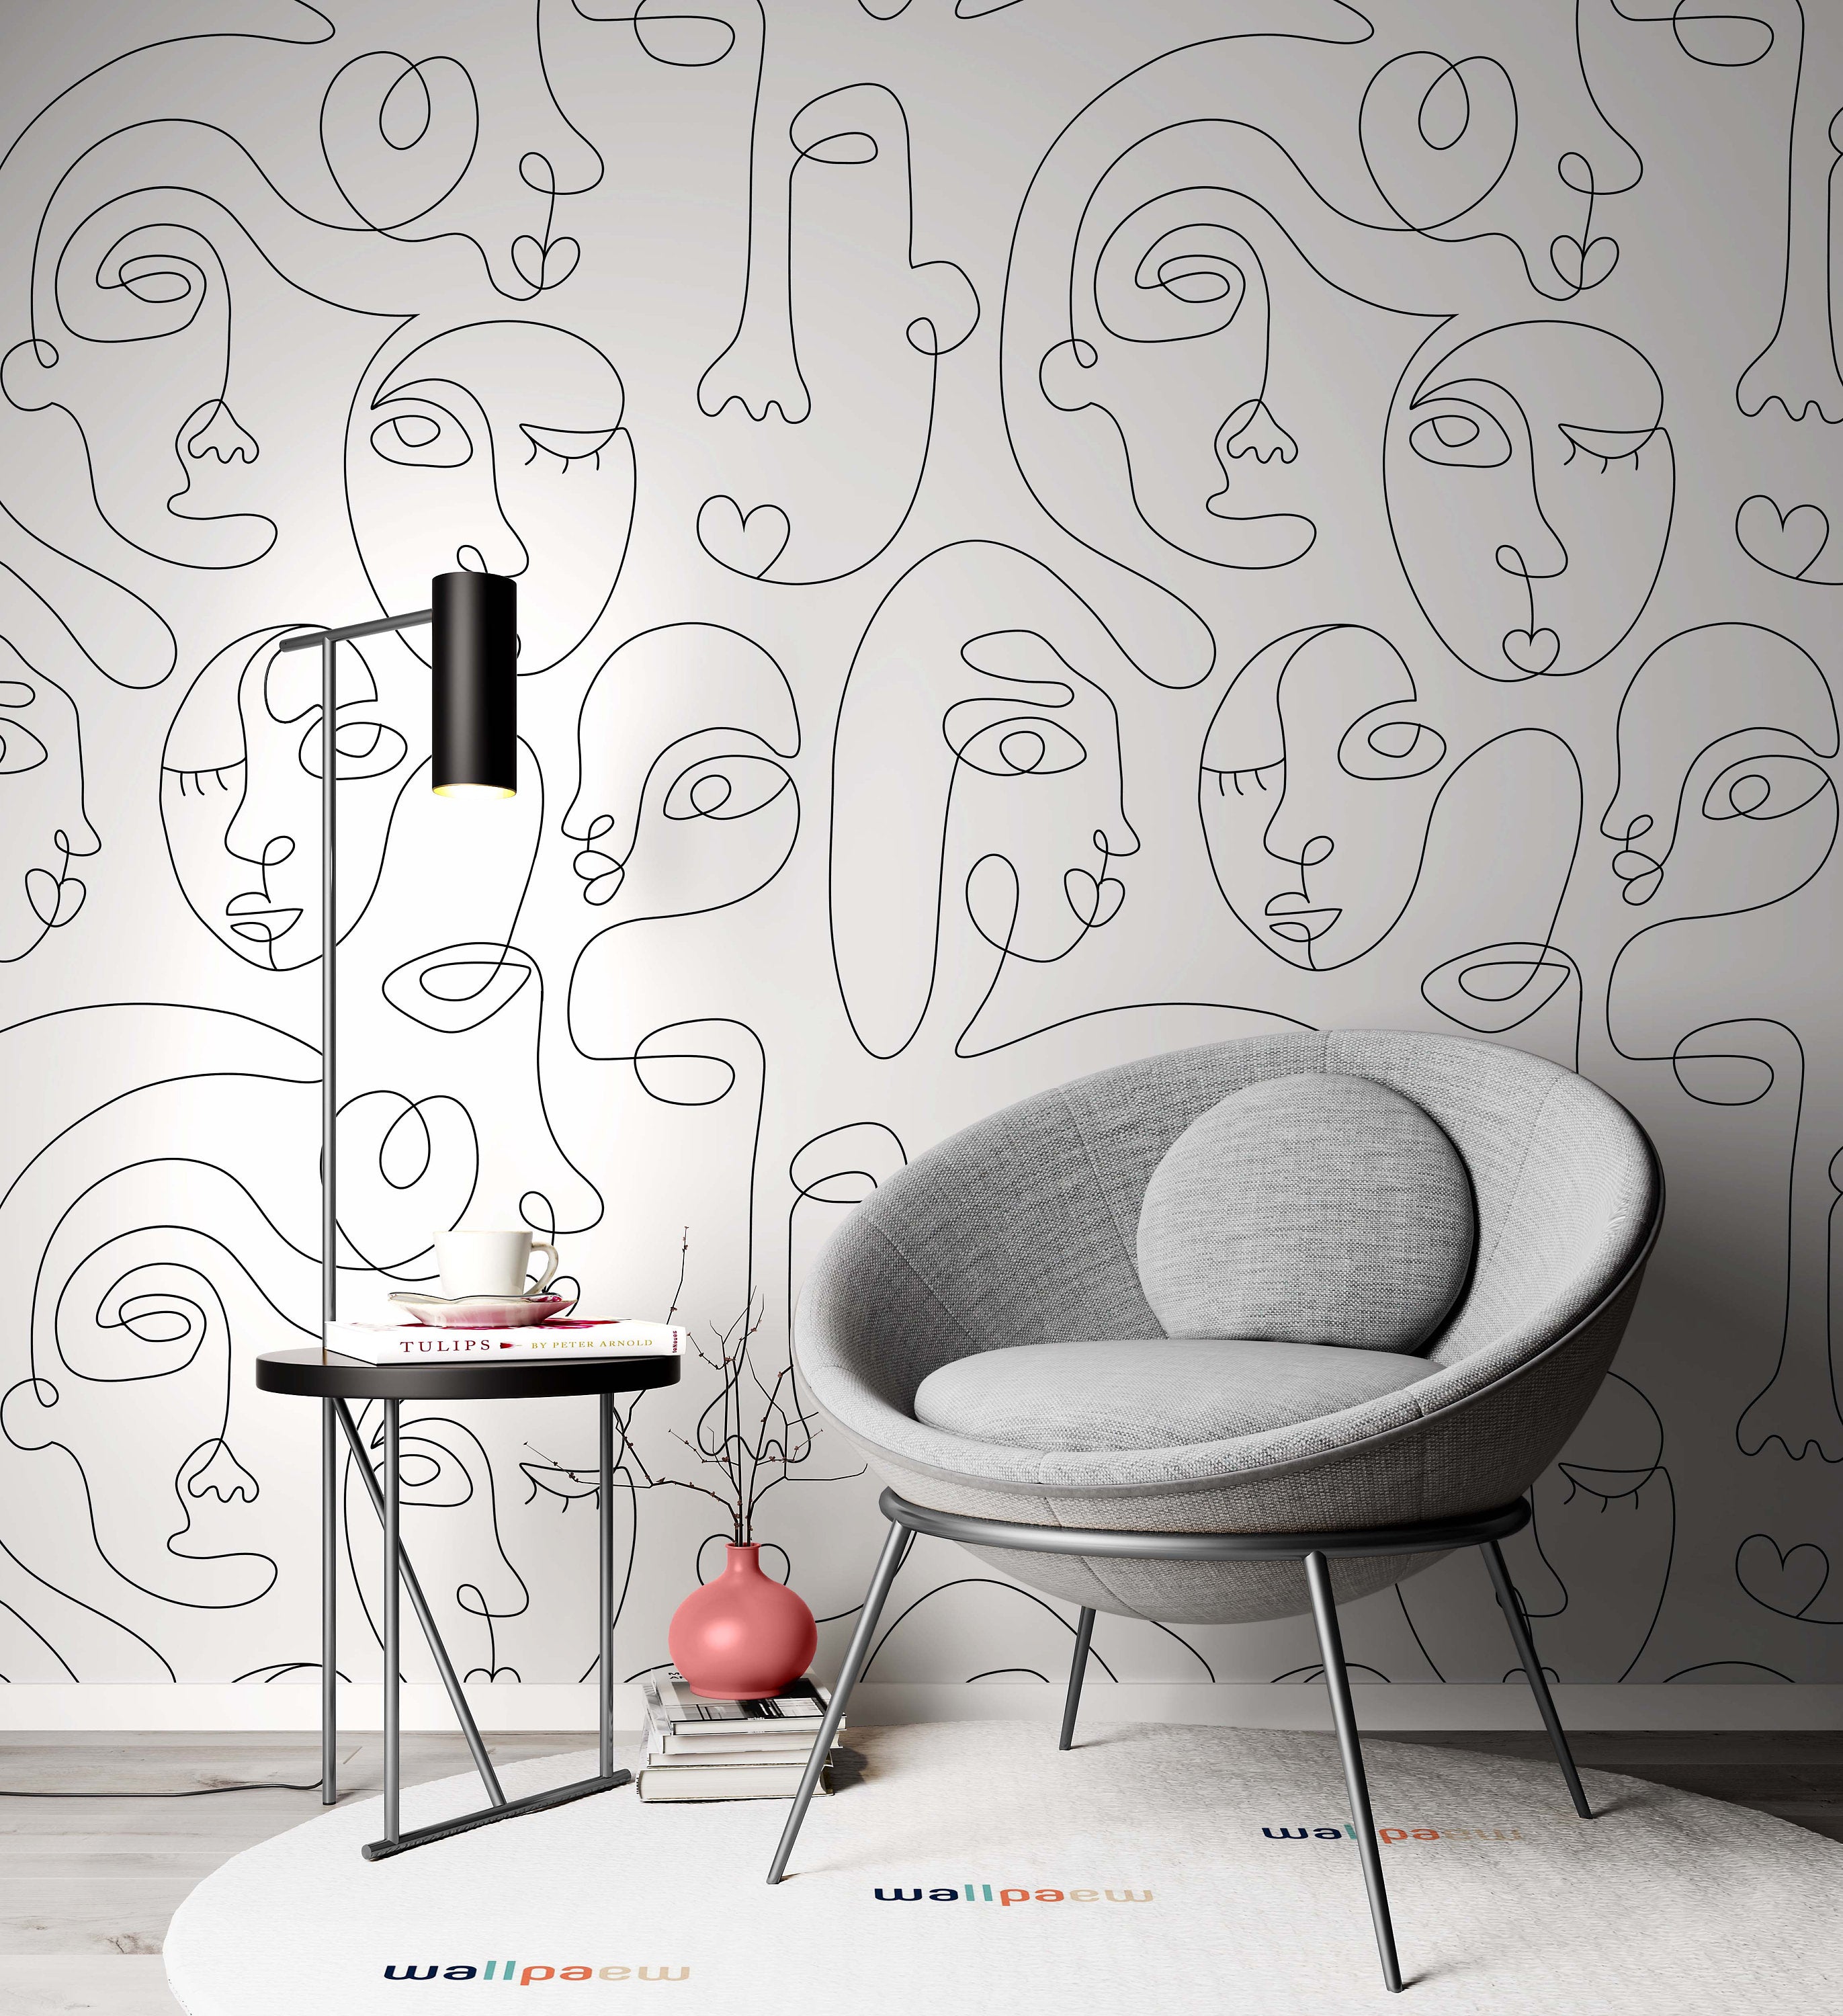 One Line Drawing Abstract Face Seamless Pattern Funny Wallpaper Nursery Children Kids Room Mural Home Decor Wall Art Removable